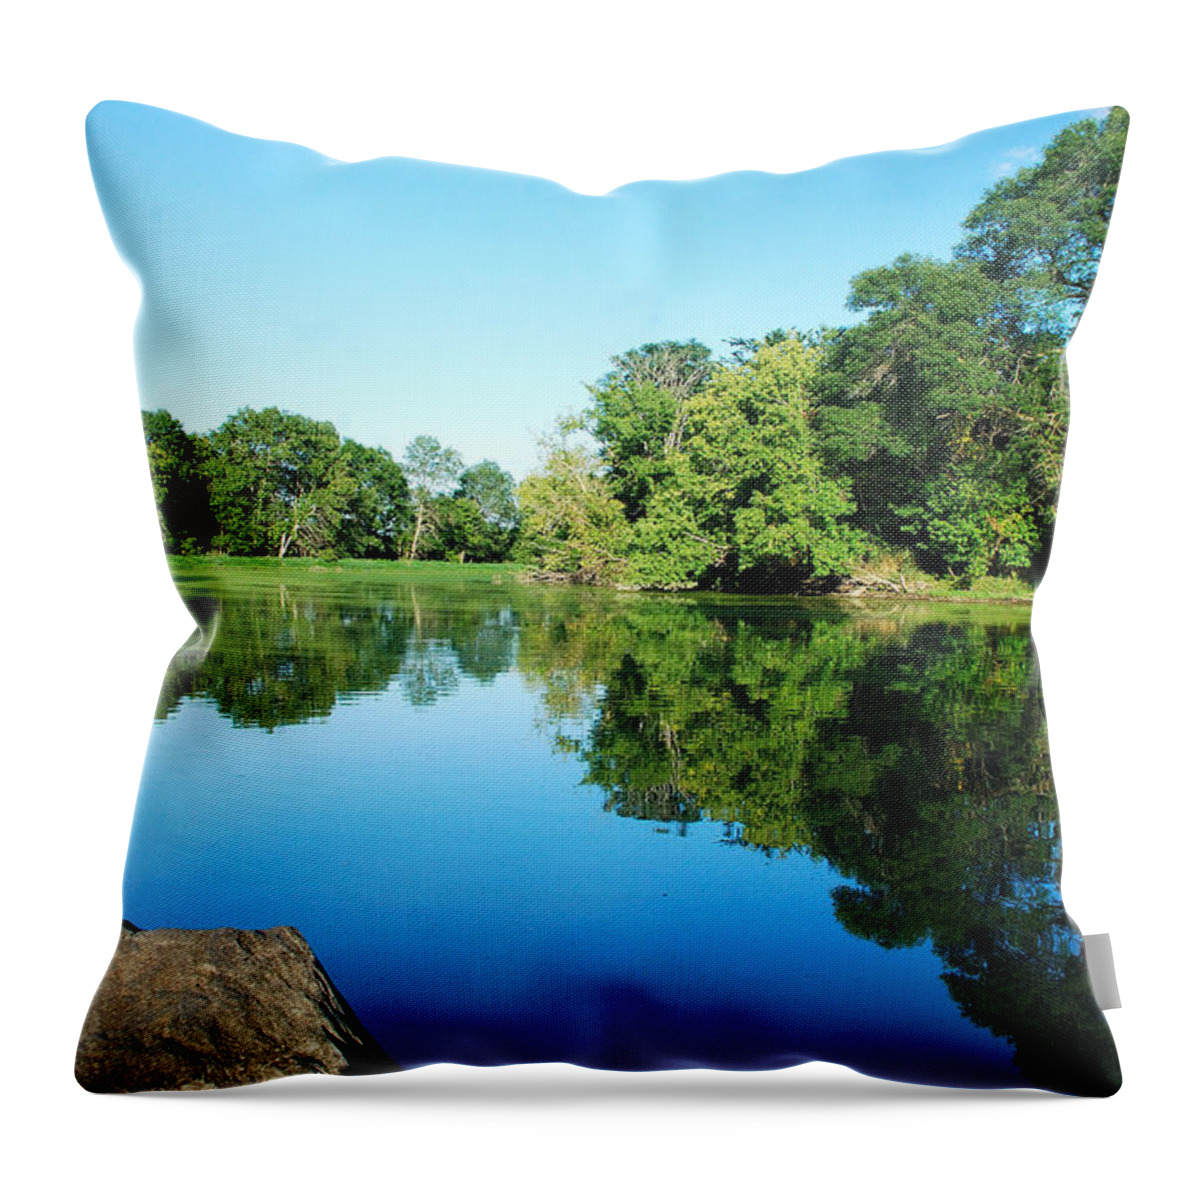 Wisconsin Throw Pillow featuring the photograph Reflections In The Crawfish by Janice Adomeit